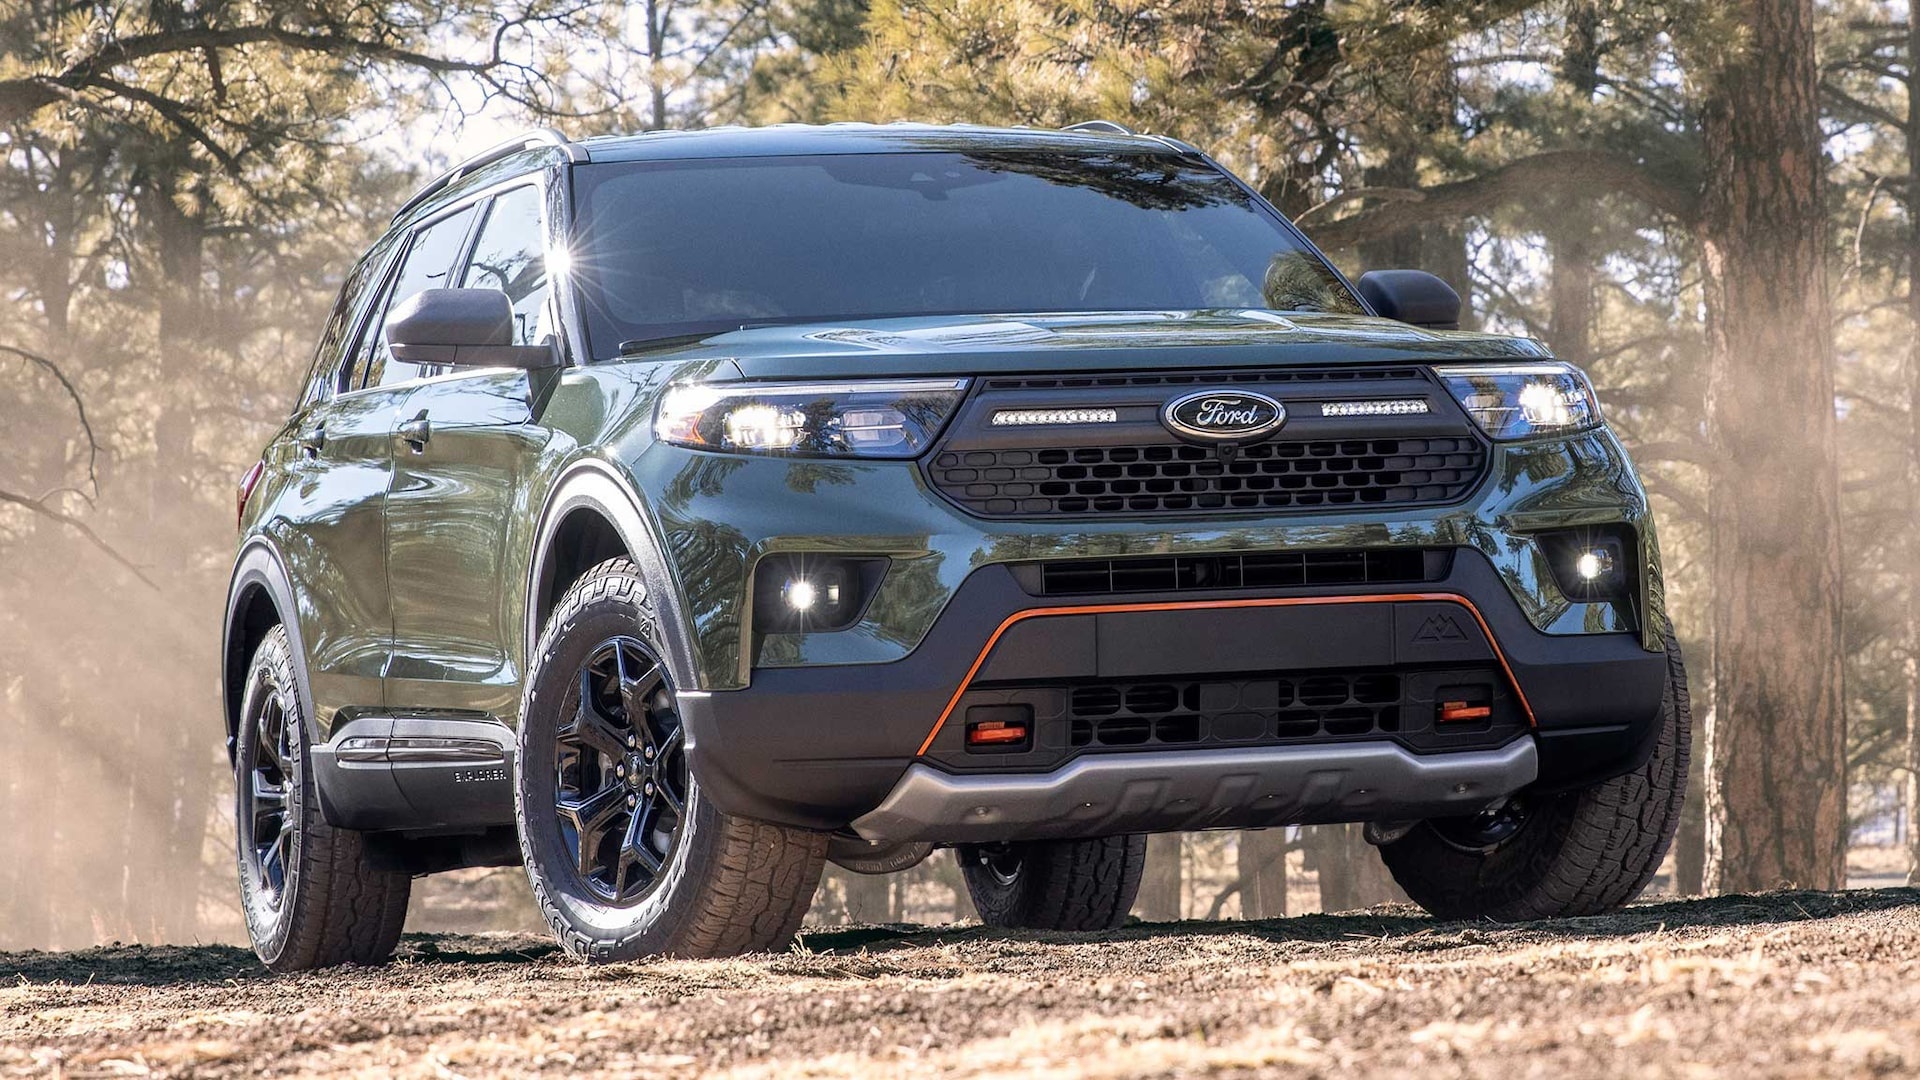 Ford Explorer, Rugged and capable, Off-road-ready, Adventure-driven, 1920x1080 Full HD Desktop